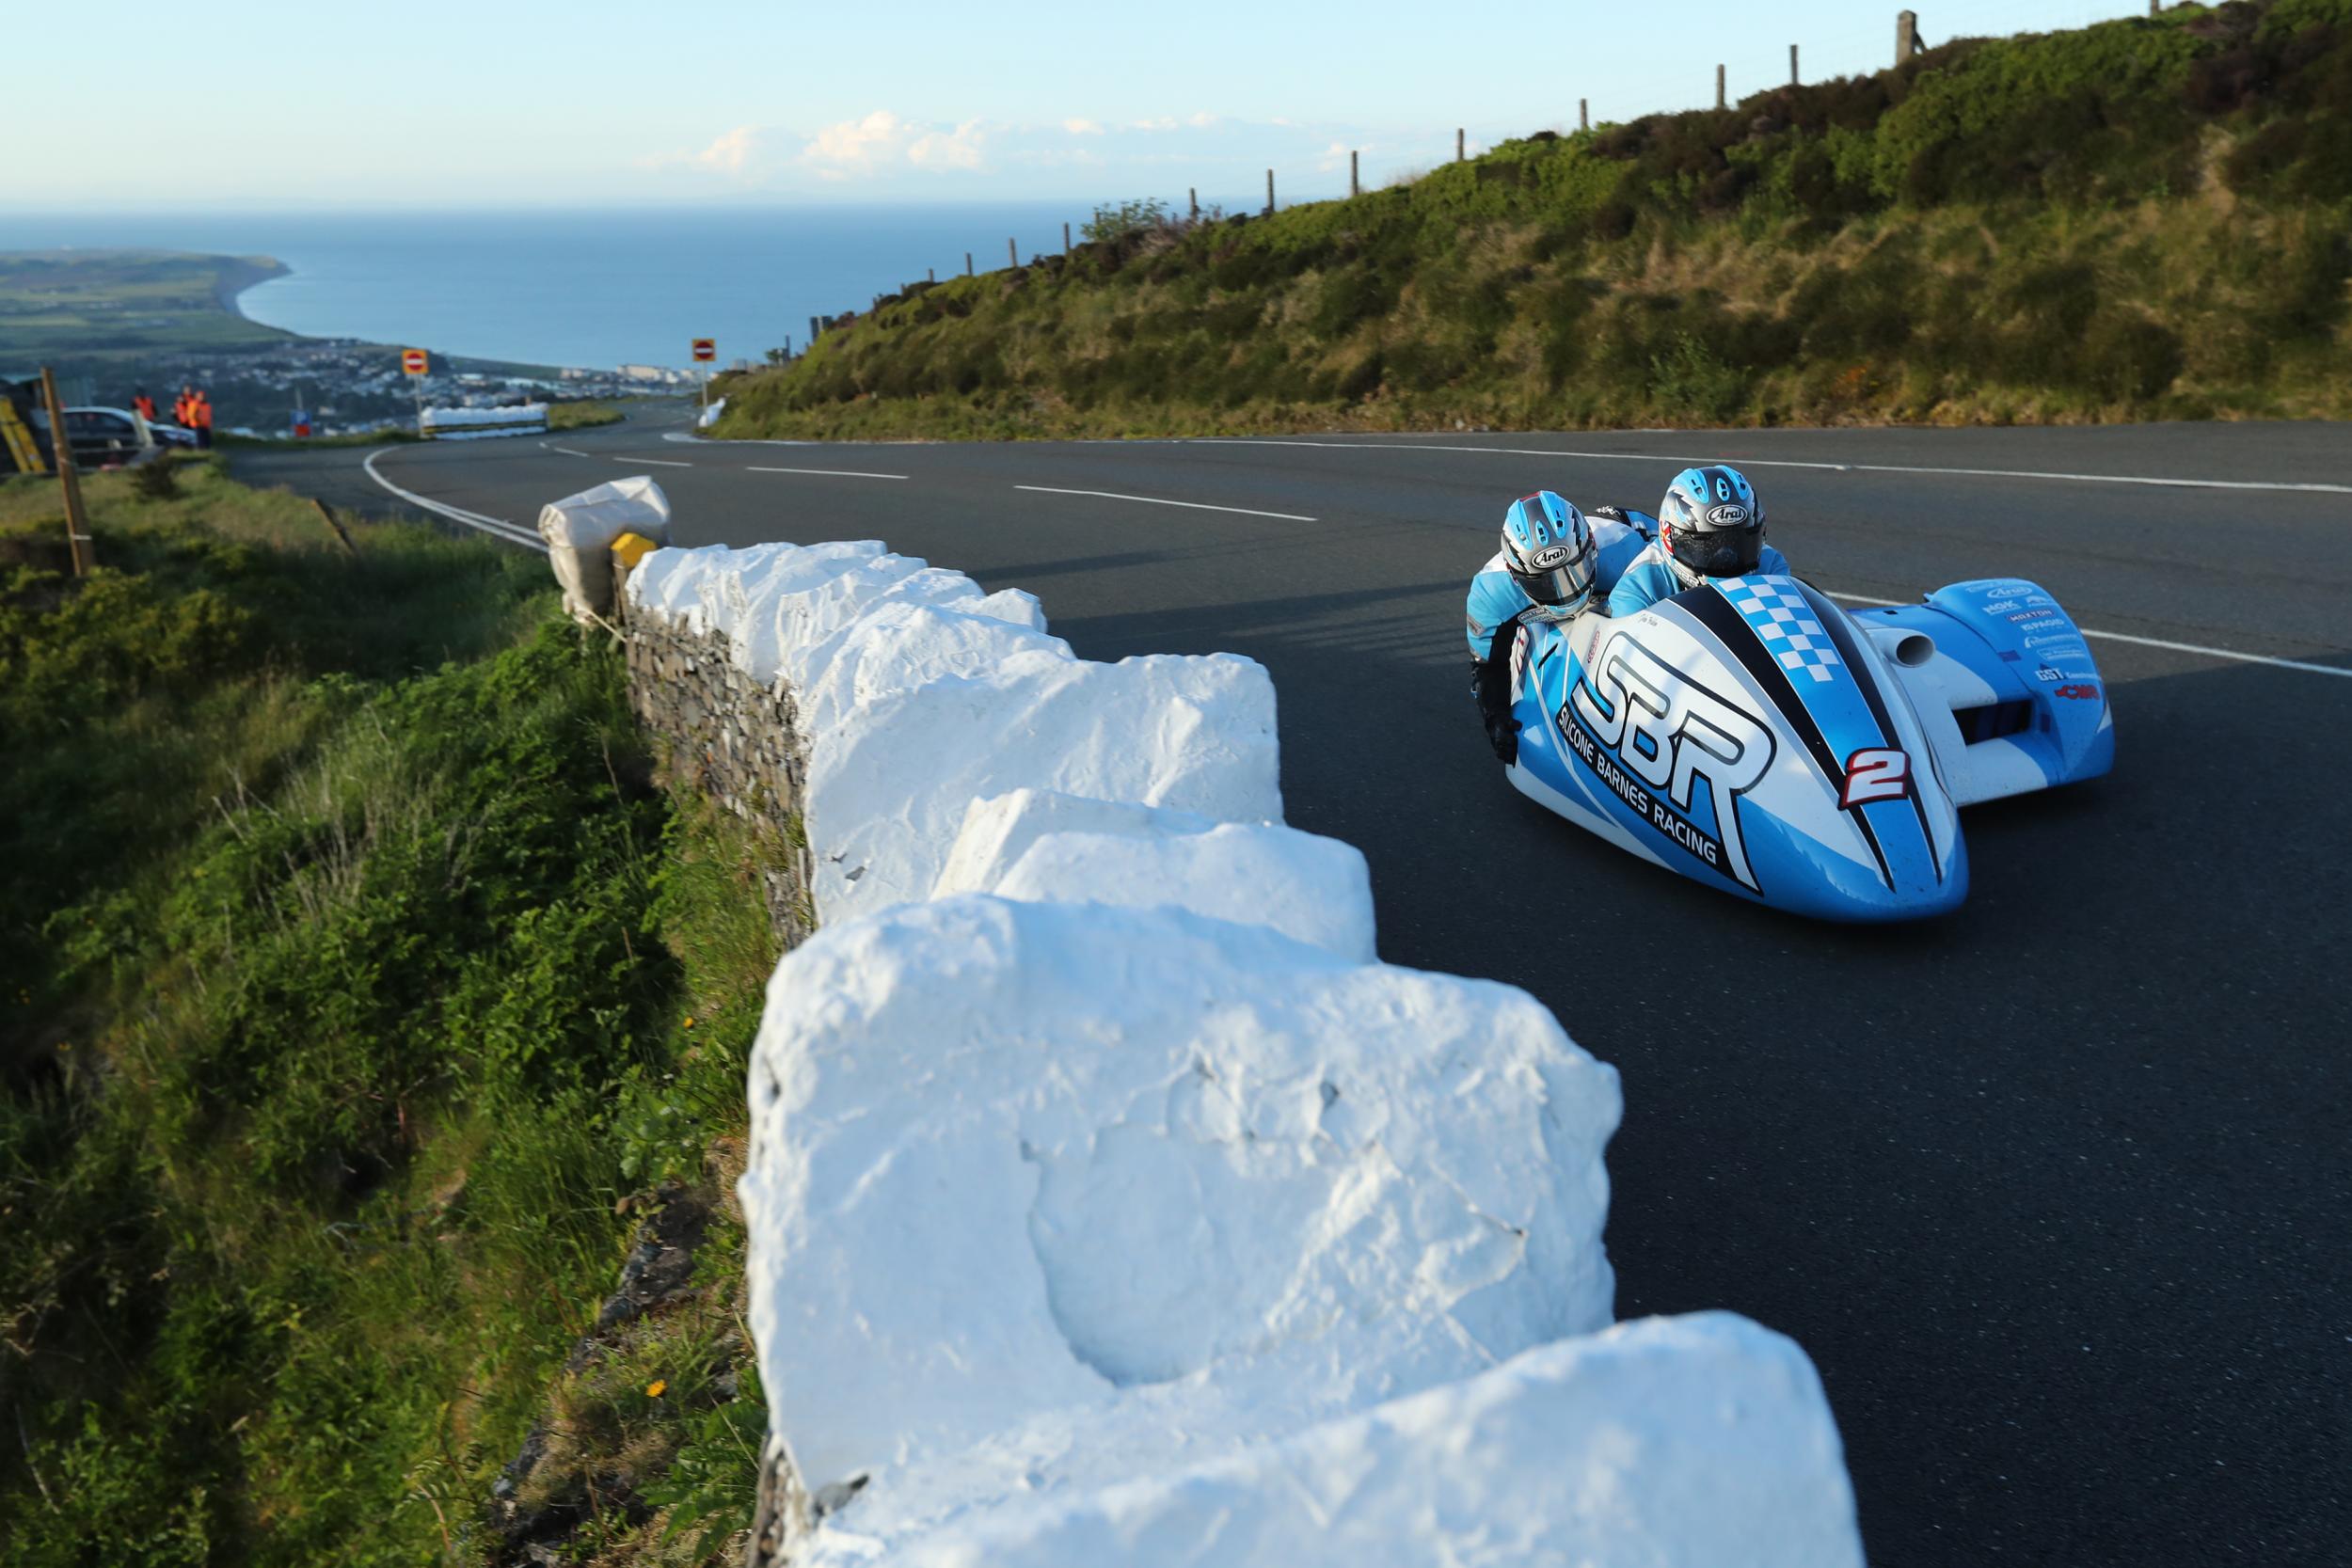 John Holden and Lee Cain topped Sidecar qualifying on Tuesday